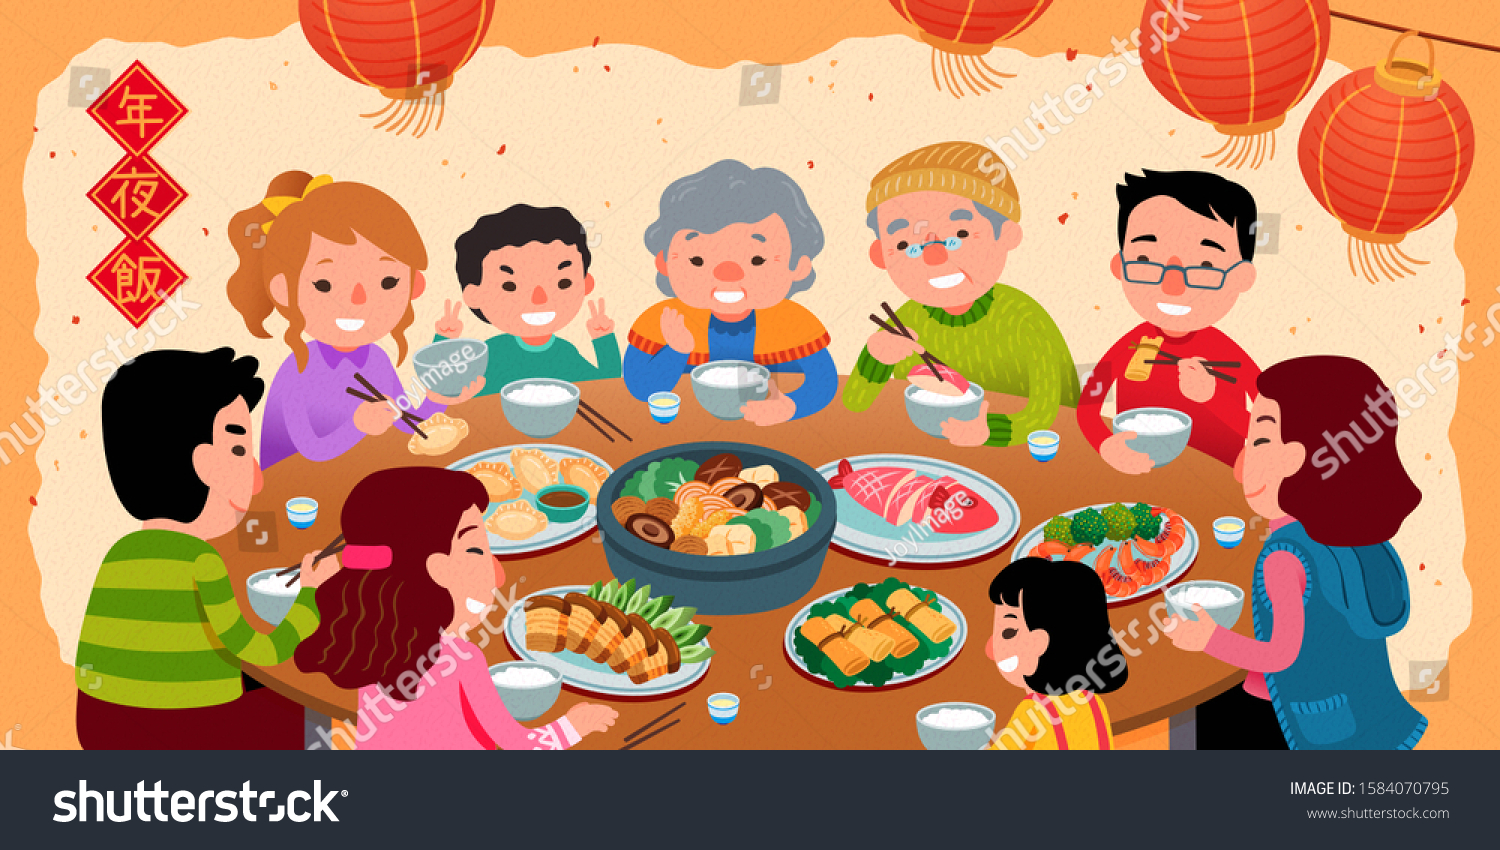 SVG of Family enjoy their reunion dinner for spring festival in flat style, Chinese text translation: New year dishes svg